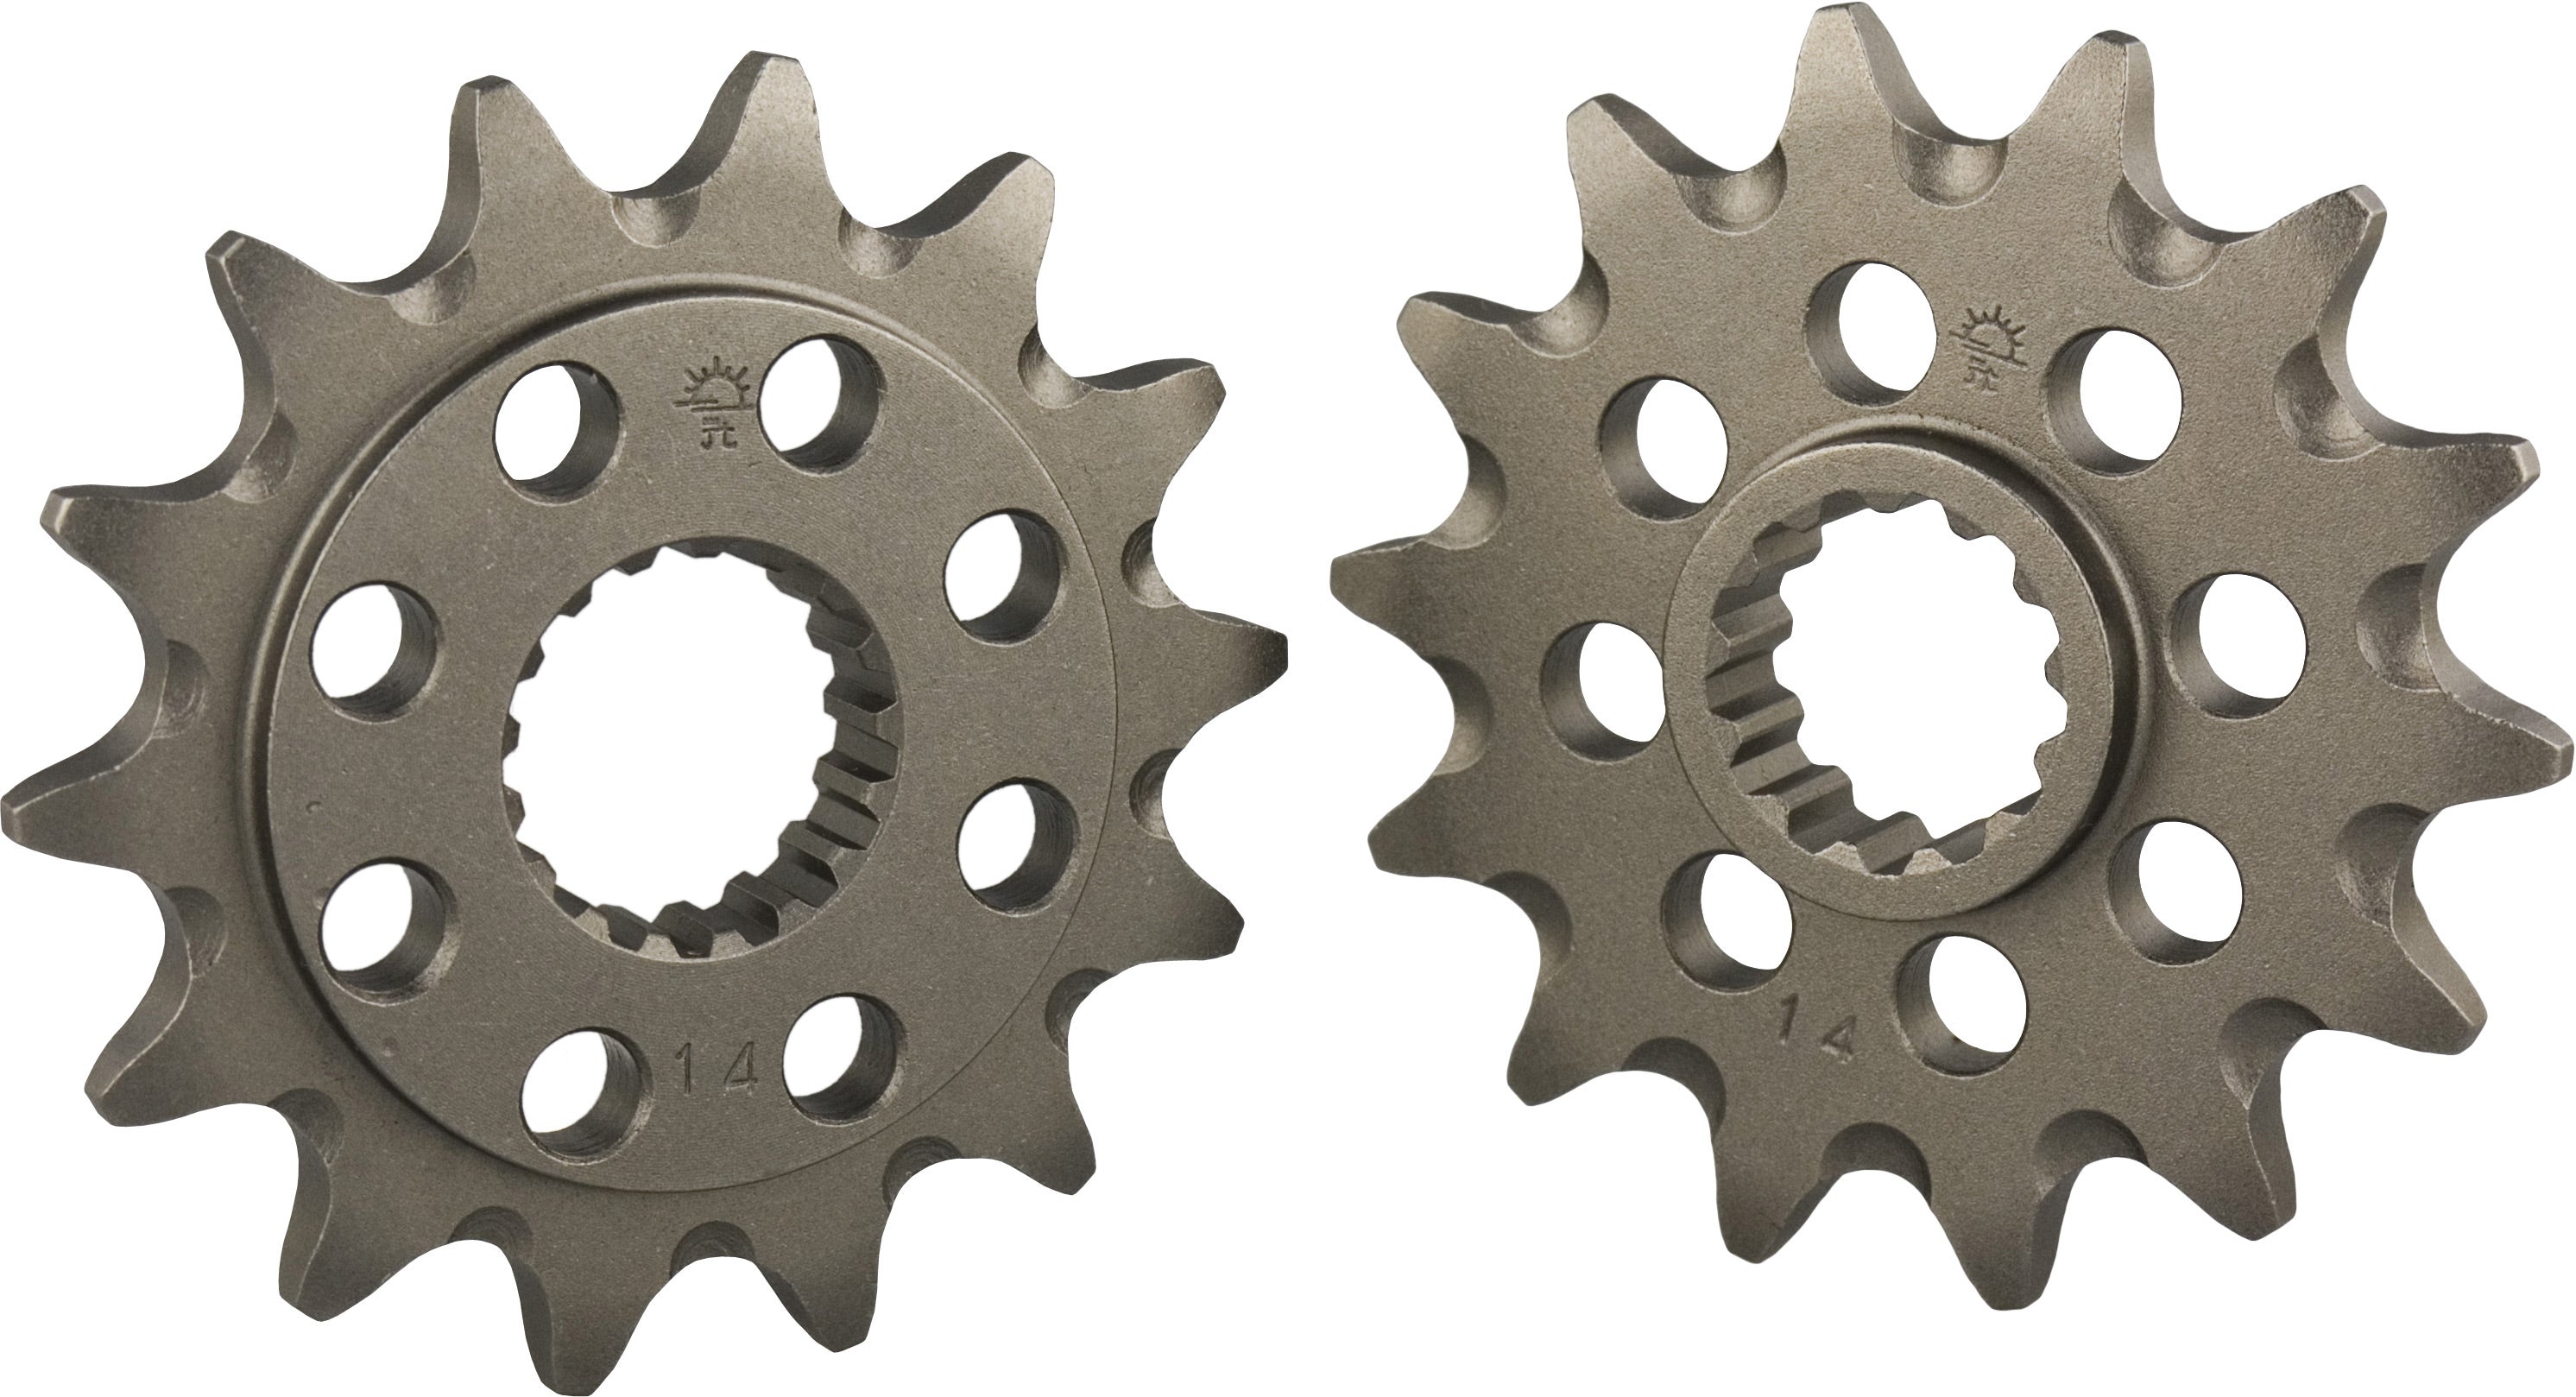 Front Sprocket SX65 98-21 TC65 14-21 MC65 21 14-tooth product image